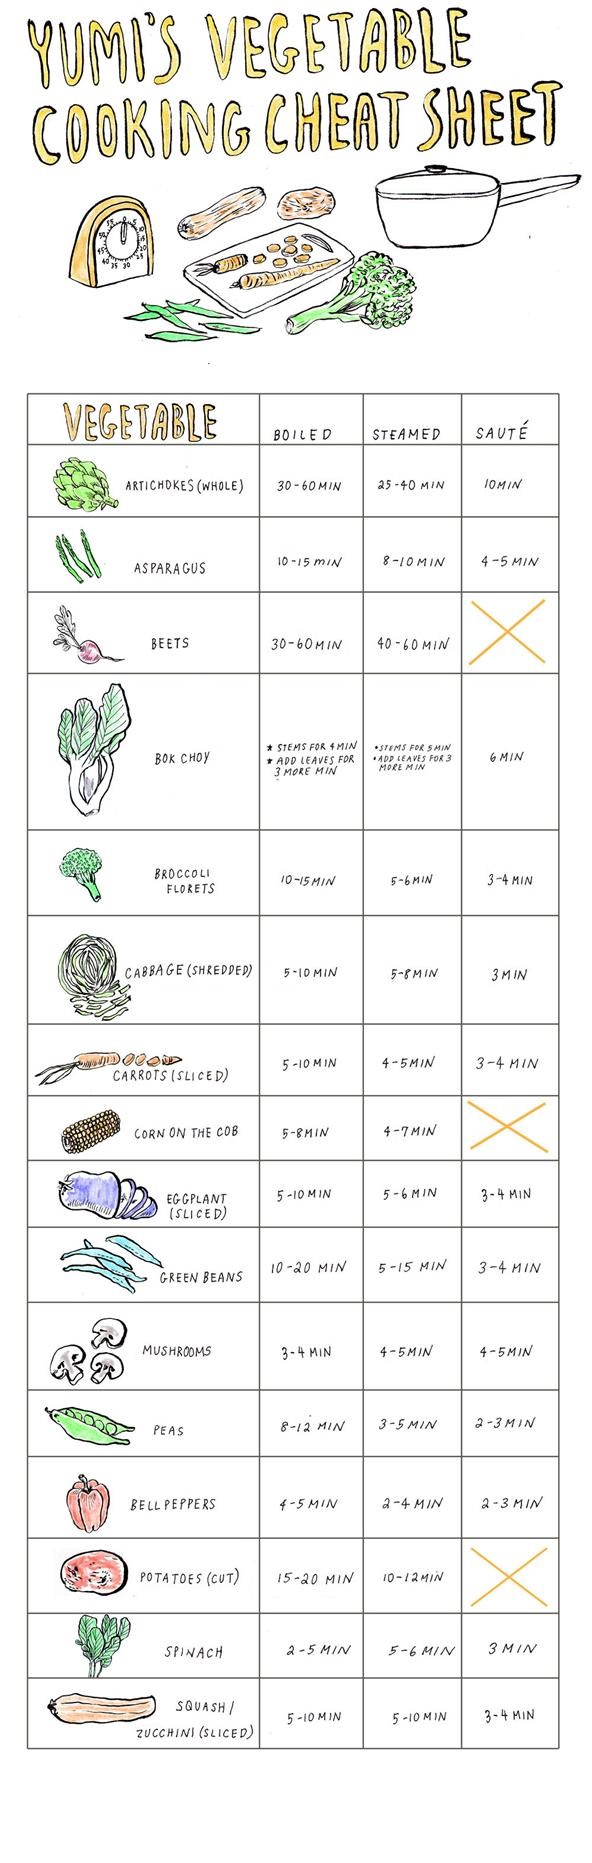 Yumi's Vegetable Cooking Cheat Sheet